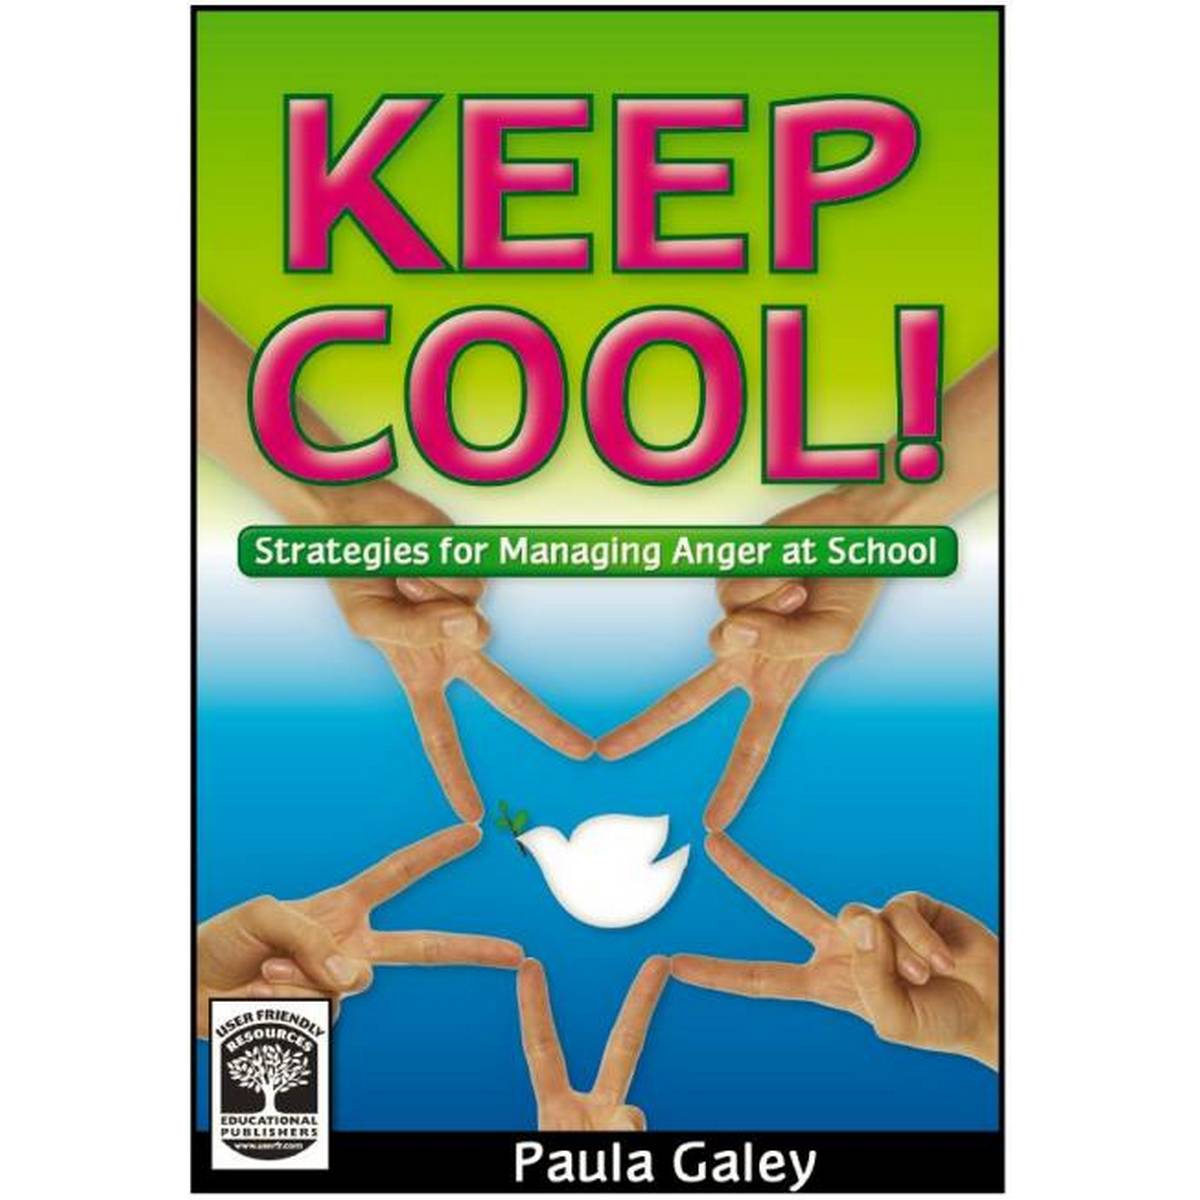 Keep Cool! Strategies for Managing Anger at School